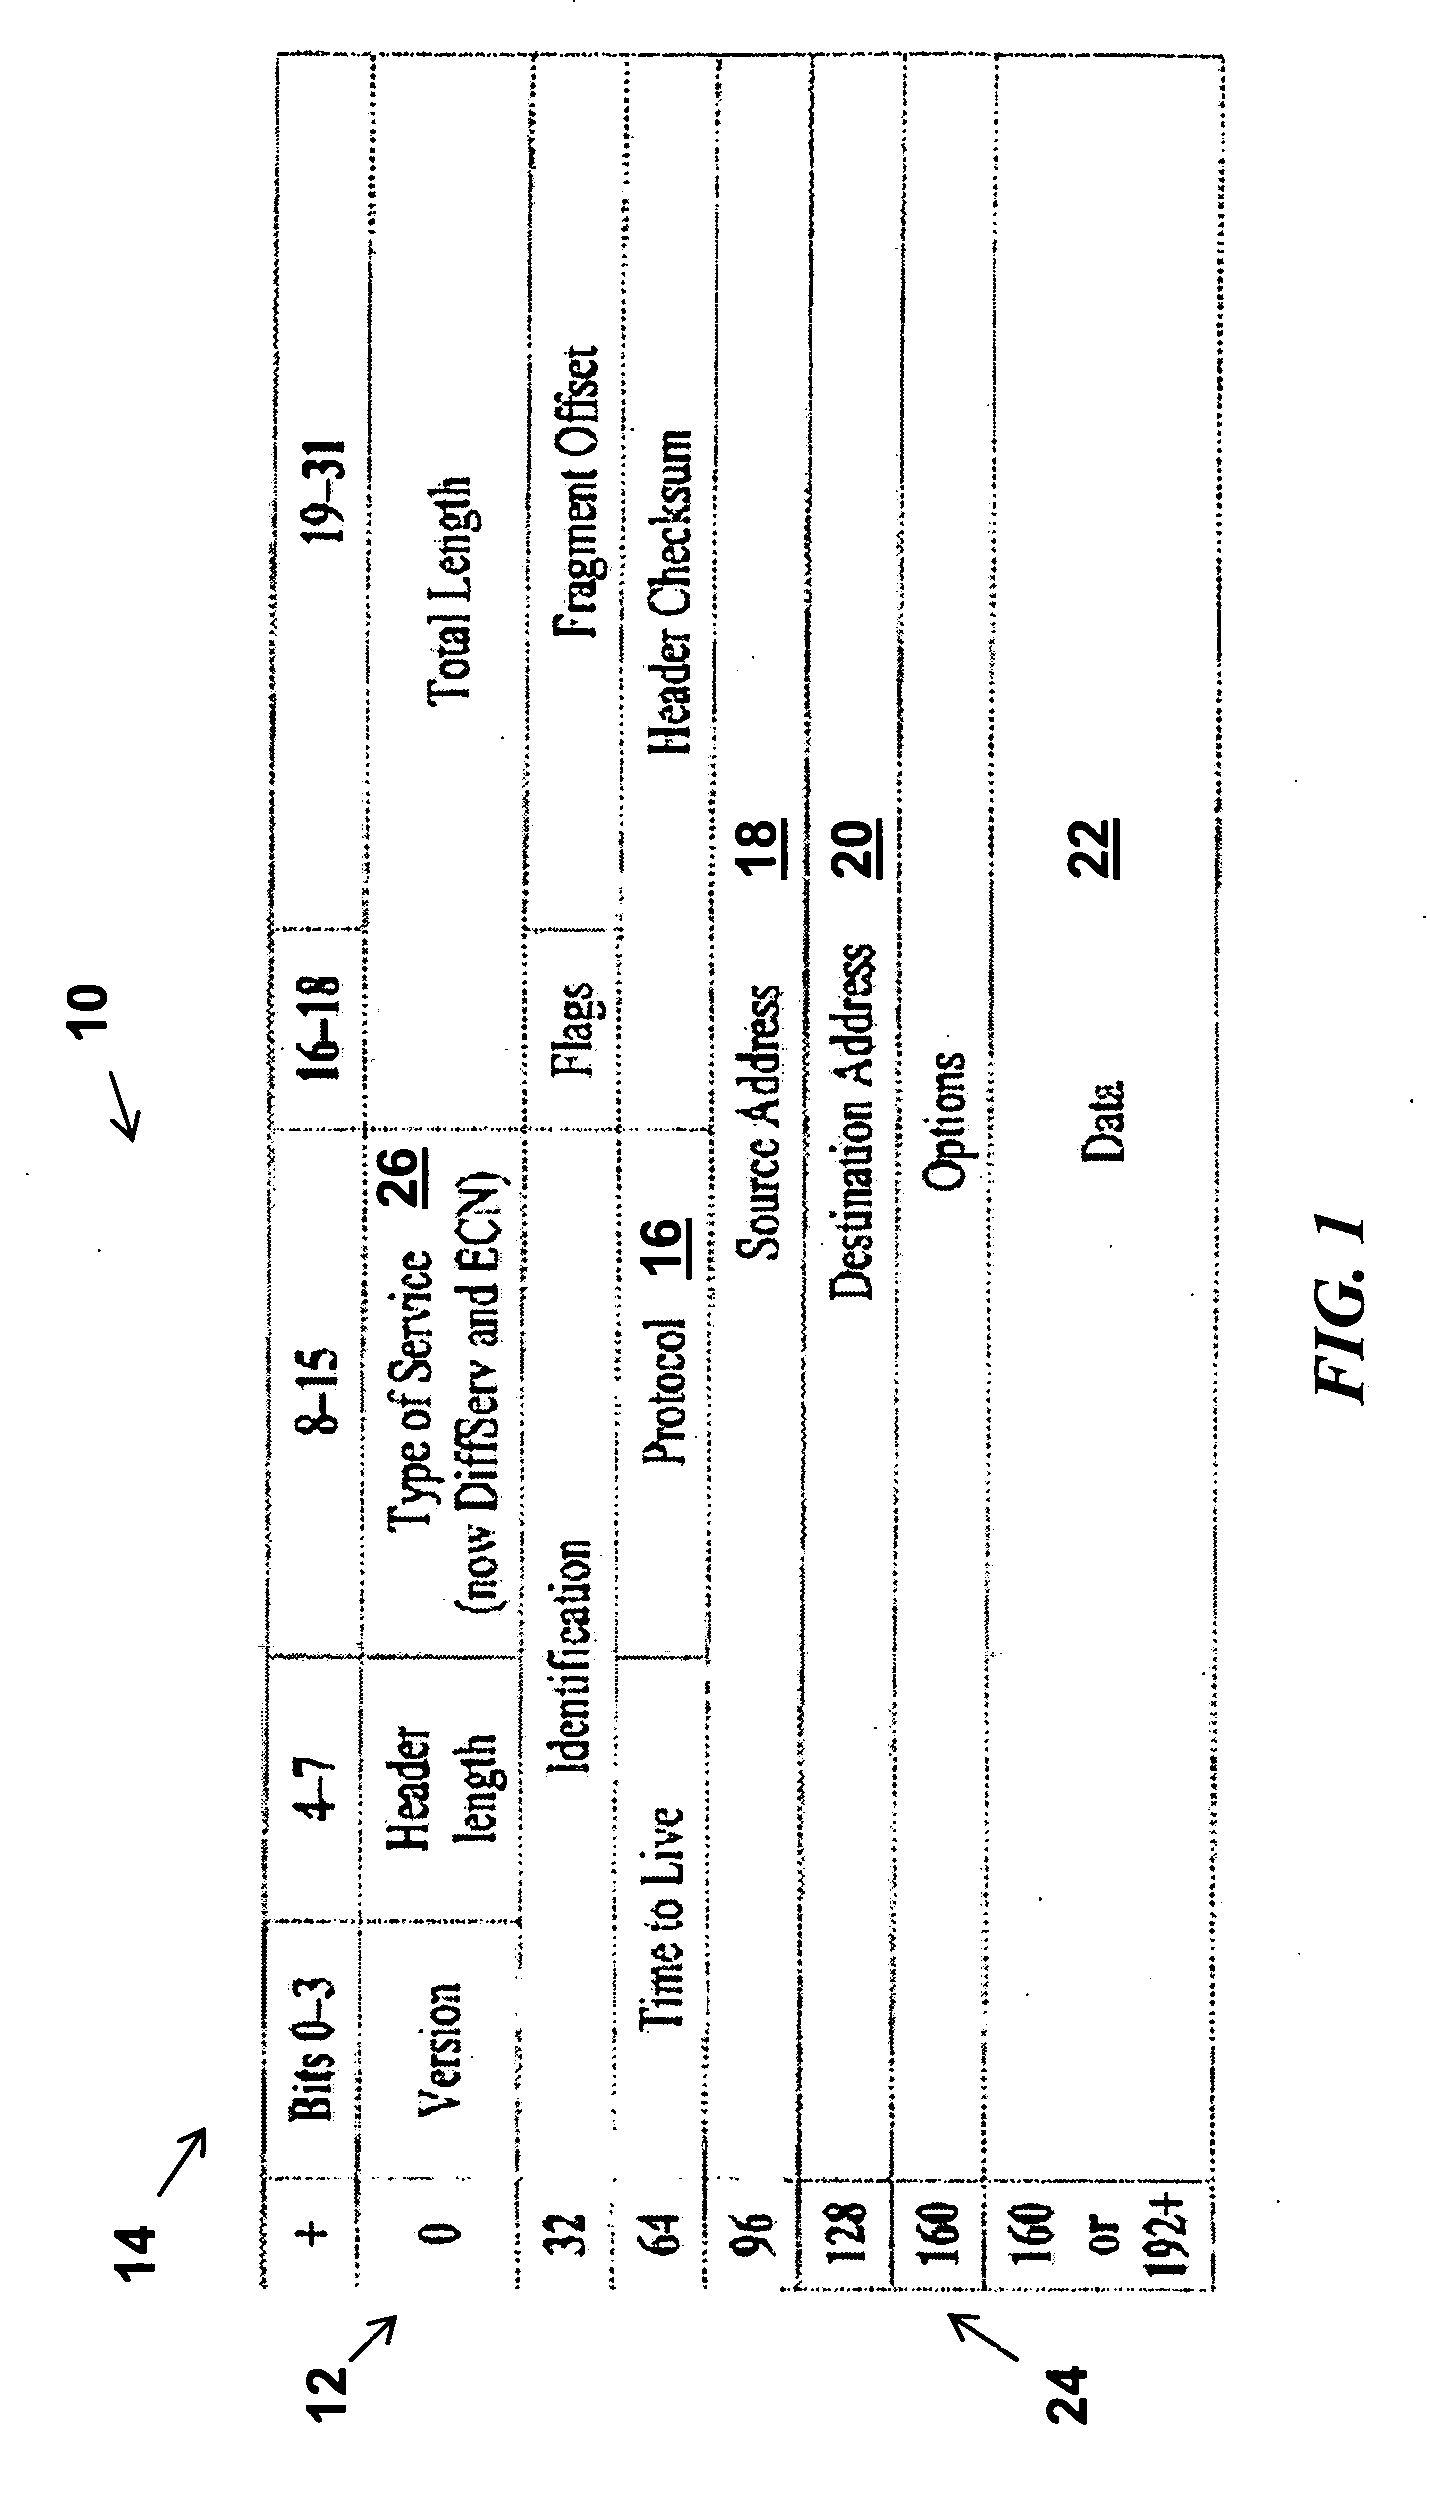 System, method, and computer readable medium for measuring network latency from flow records